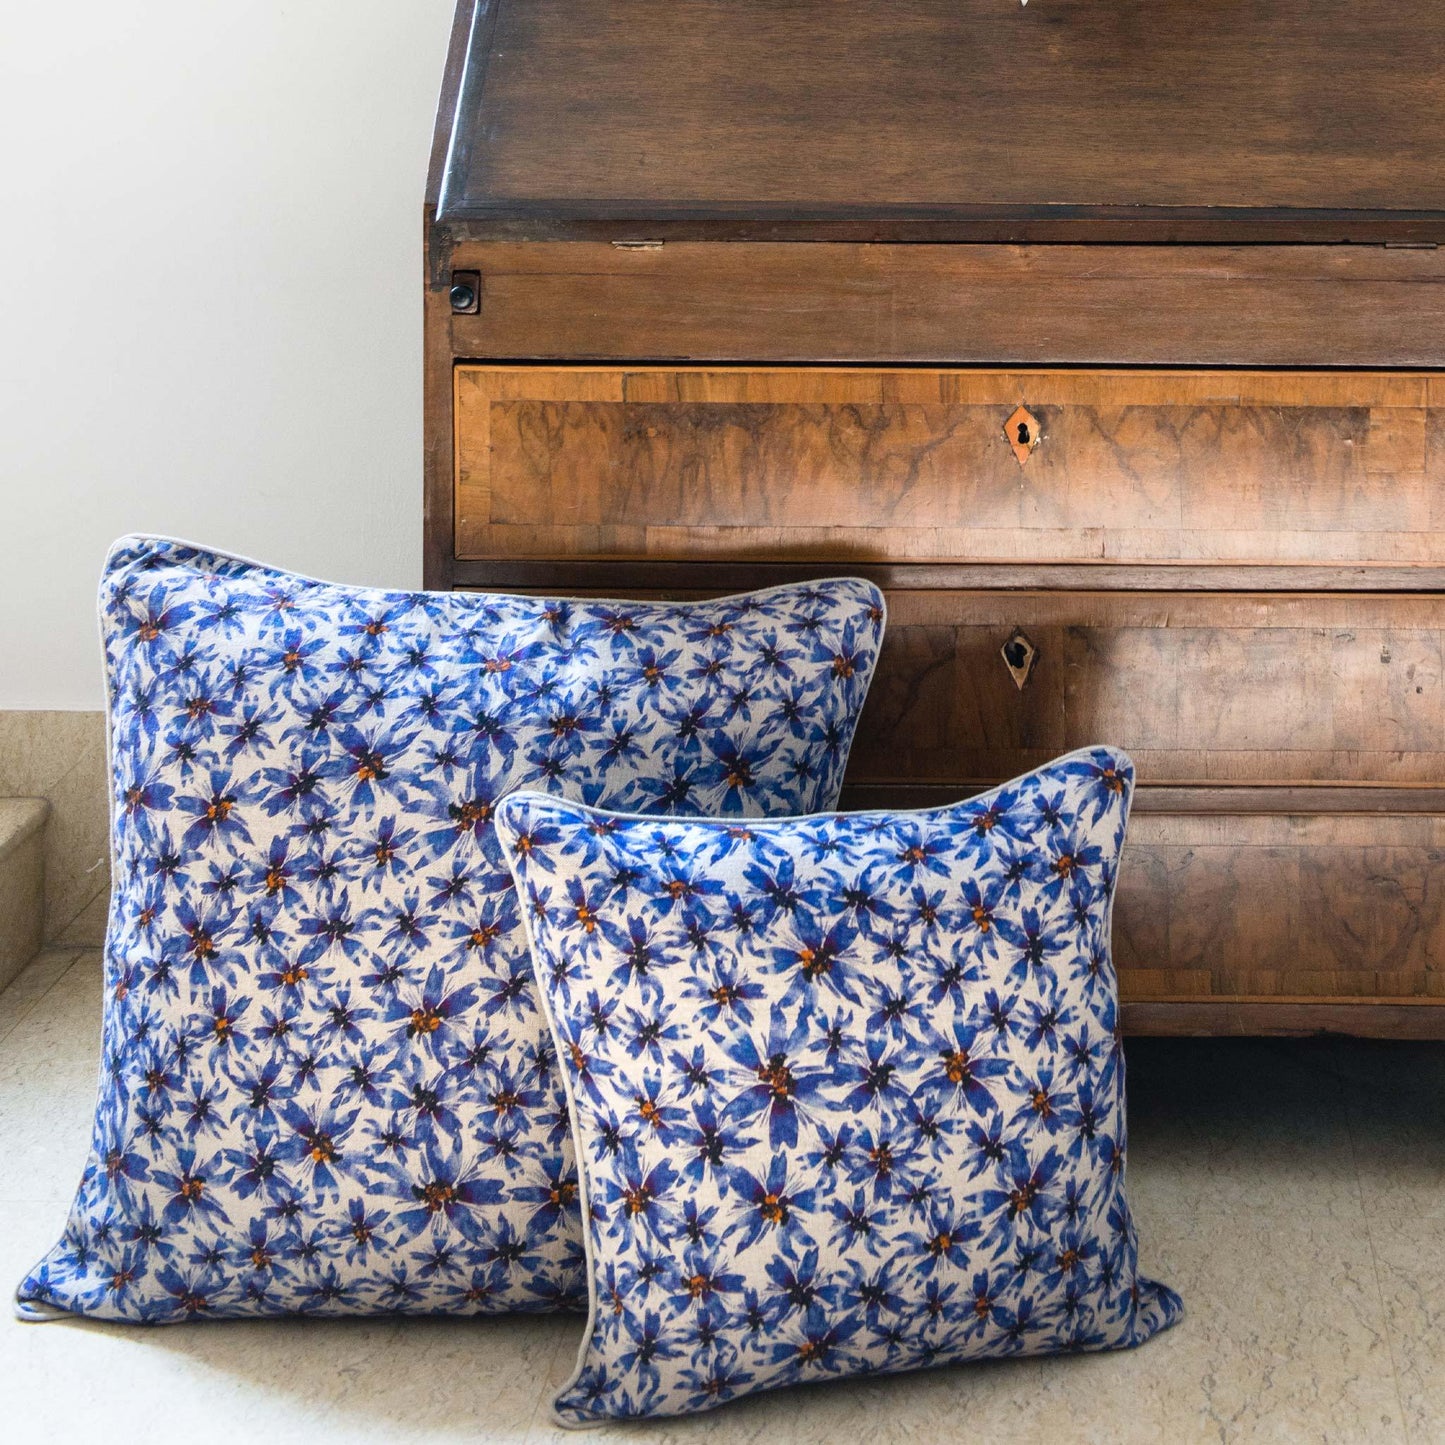 Blue illustrated flower print linen cushion covers in front of wooden desk.